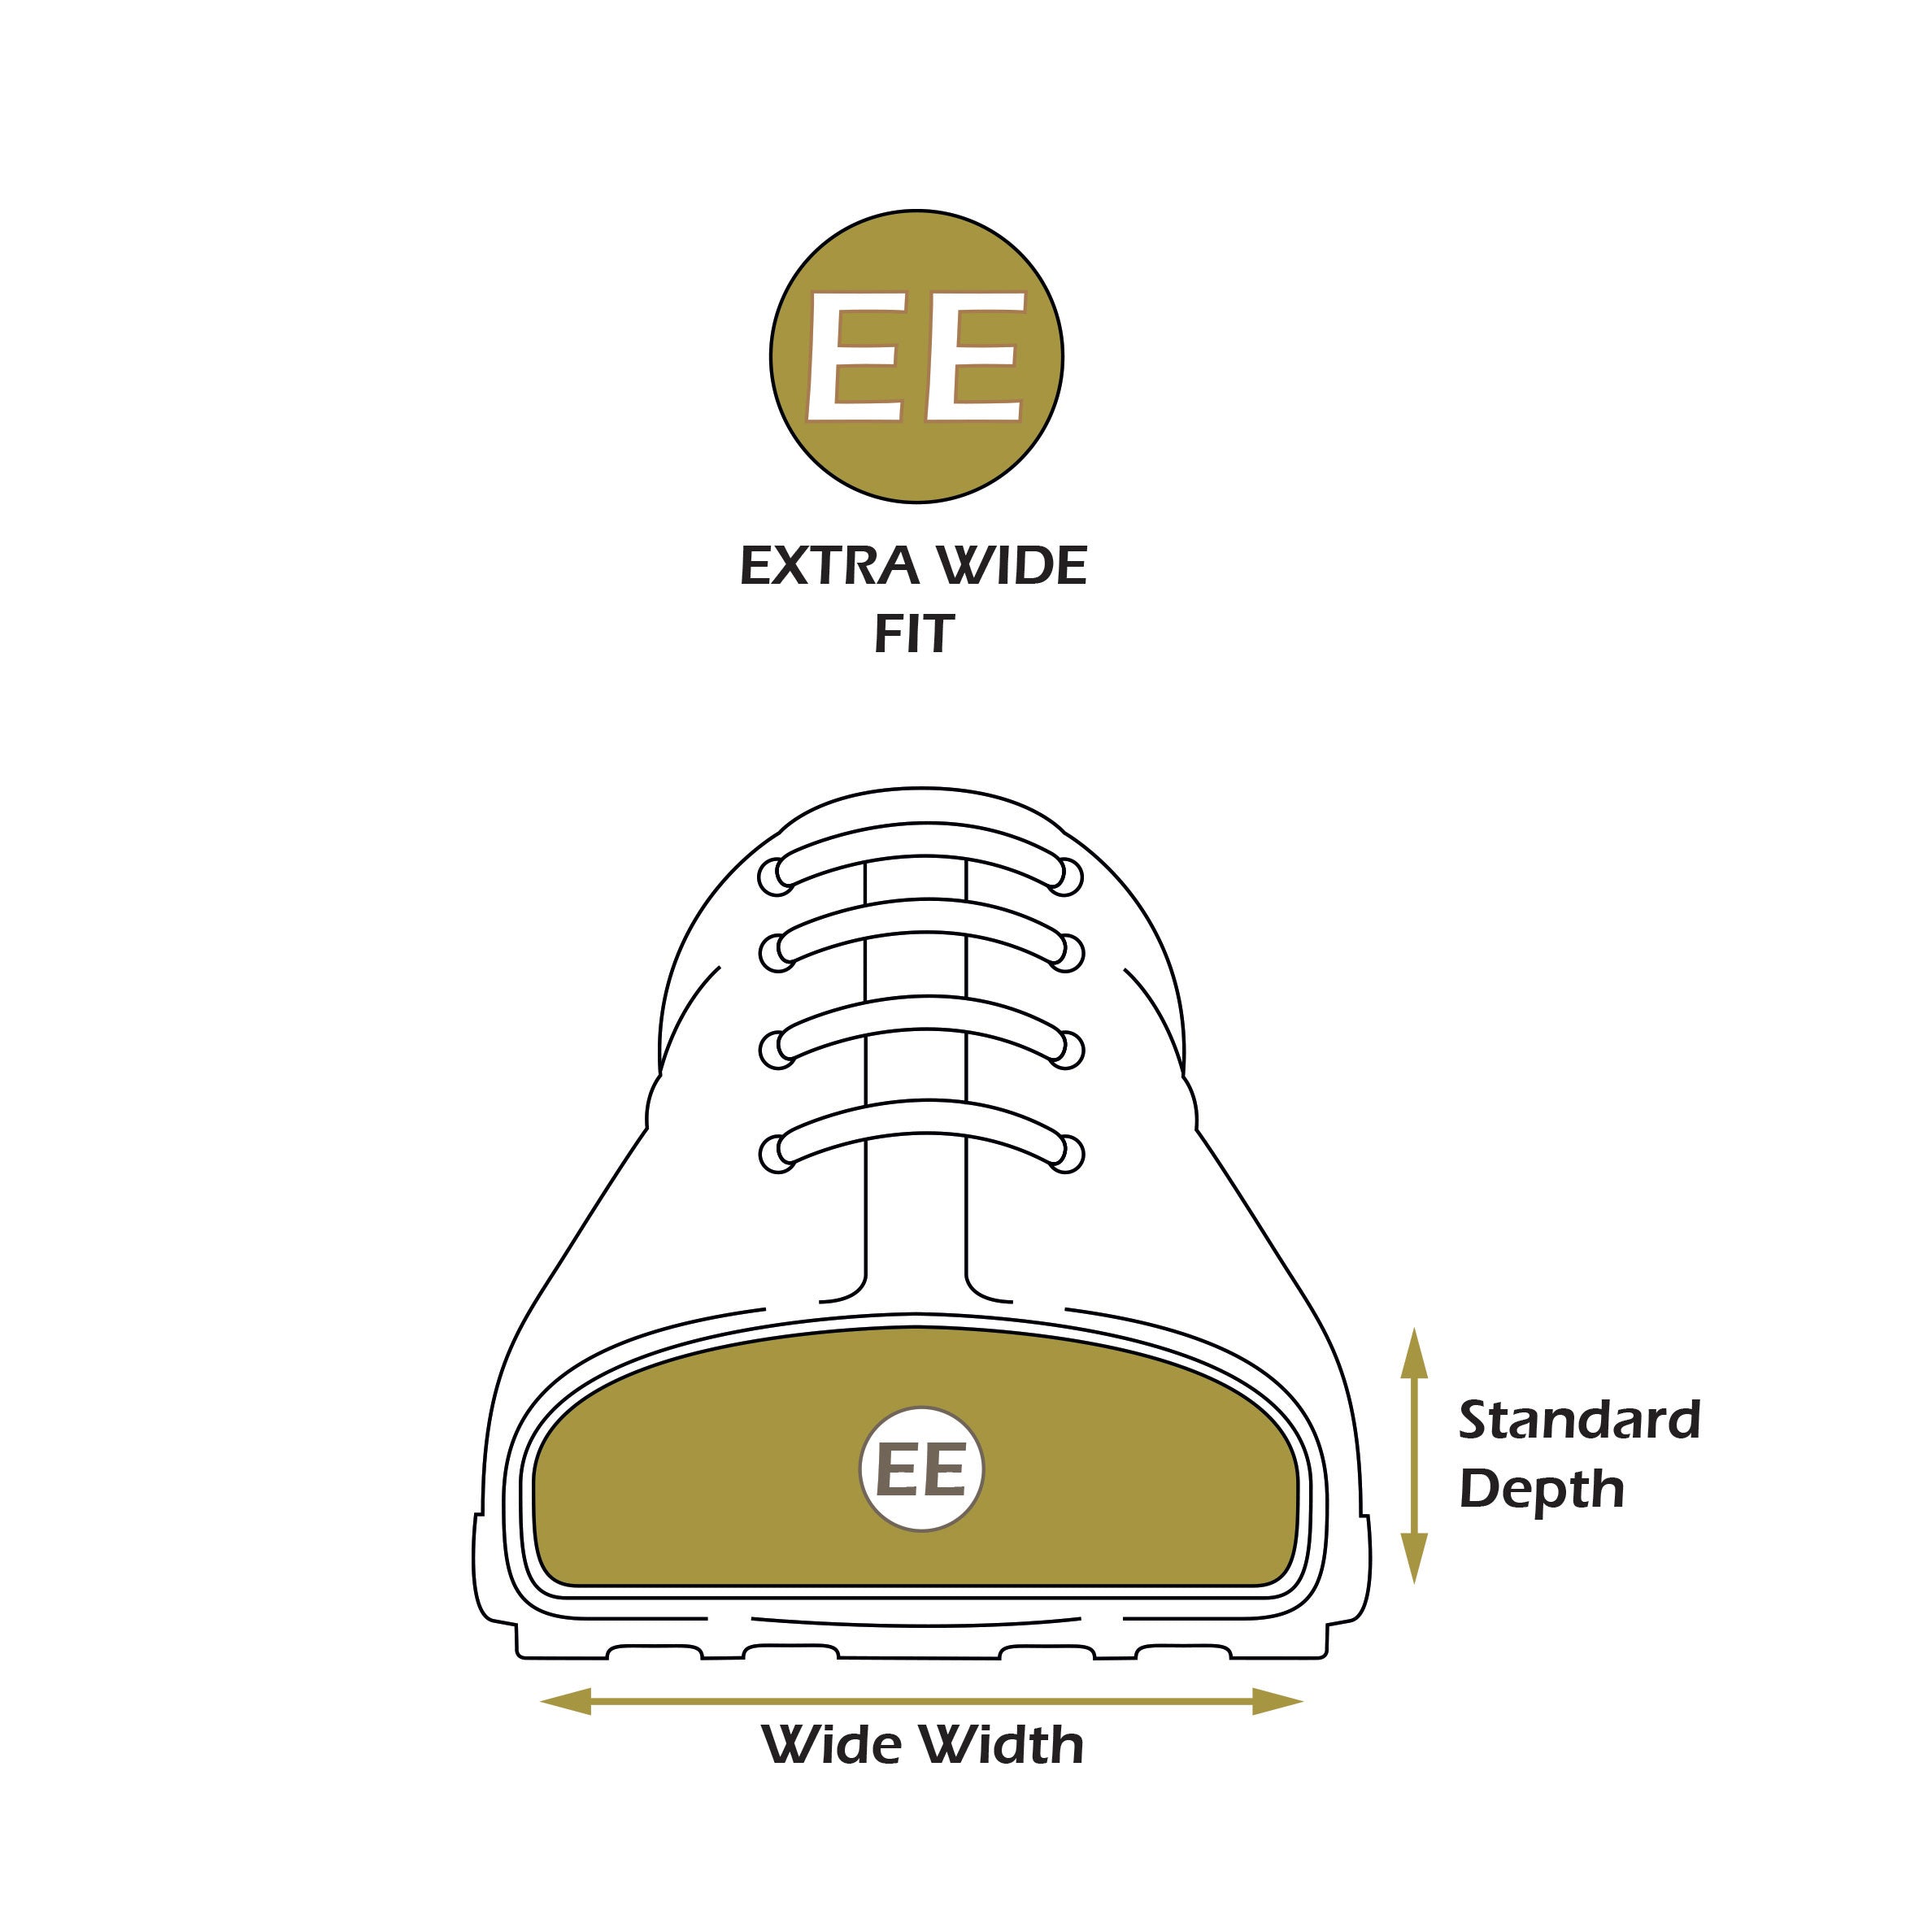 2E Width Fitting - Wider than E Fit